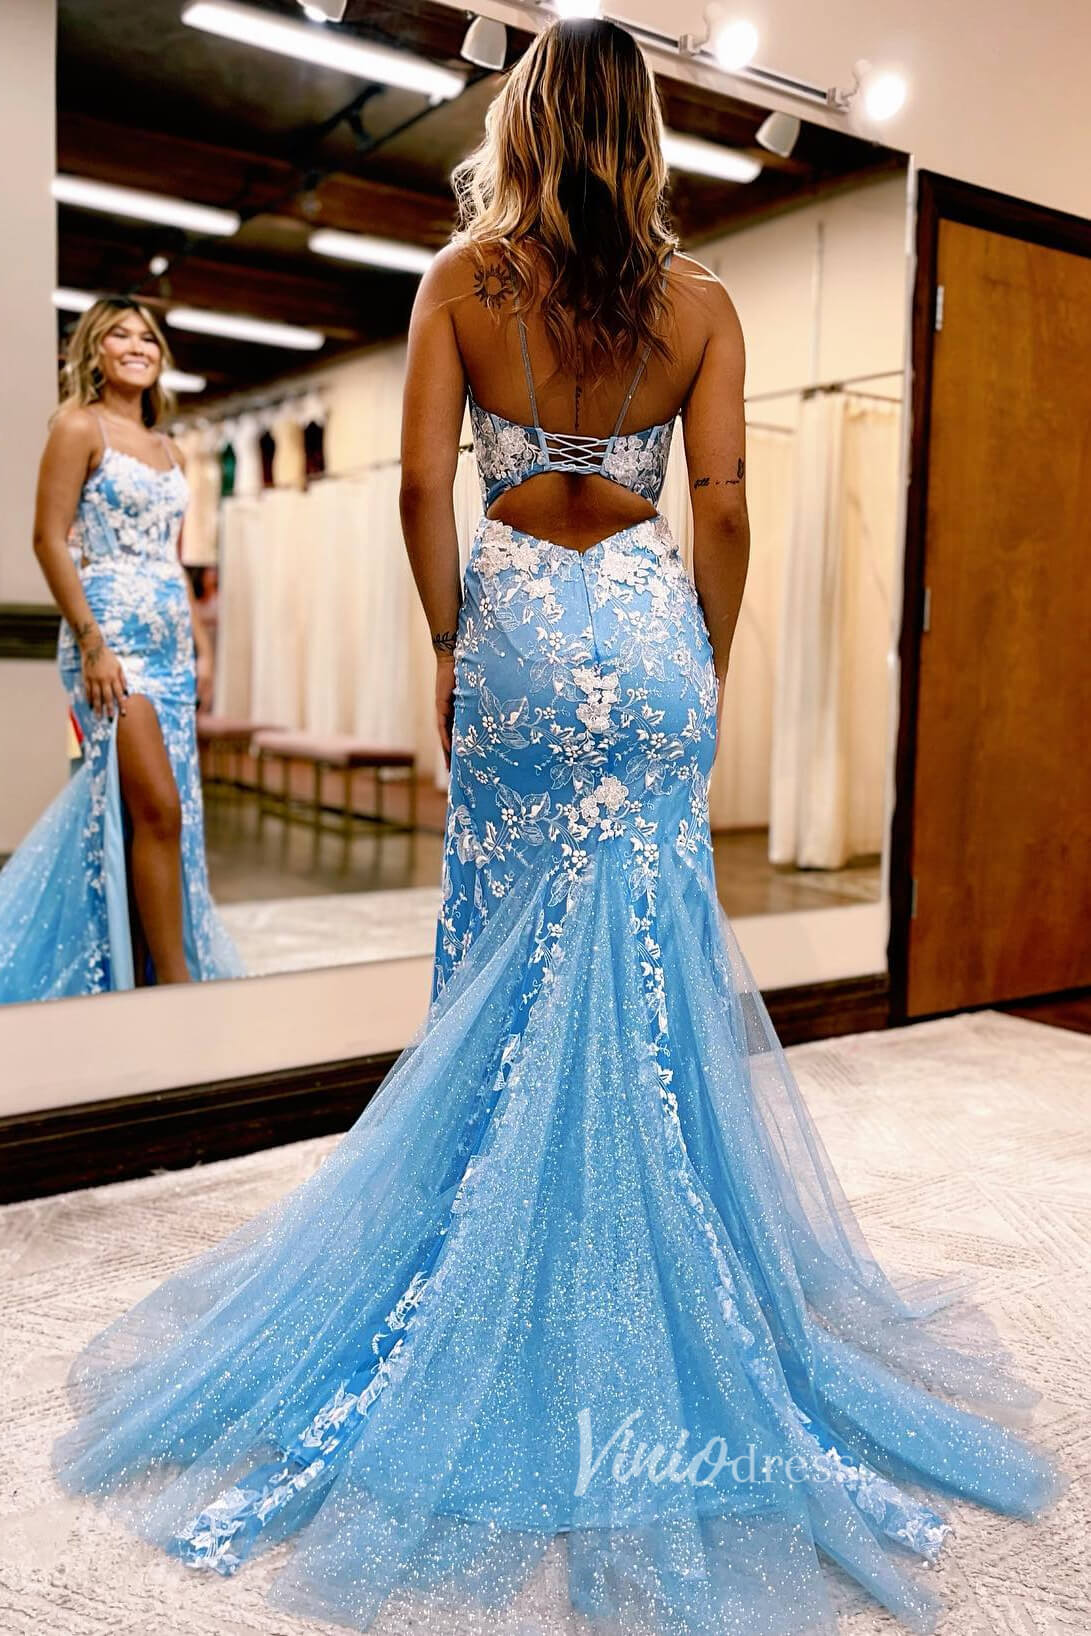 Gorgeous Light Blue Lace Applique Mermaid Prom Dress with Spaghetti Straps and High Slit FD3460-prom dresses-Viniodress-Viniodress